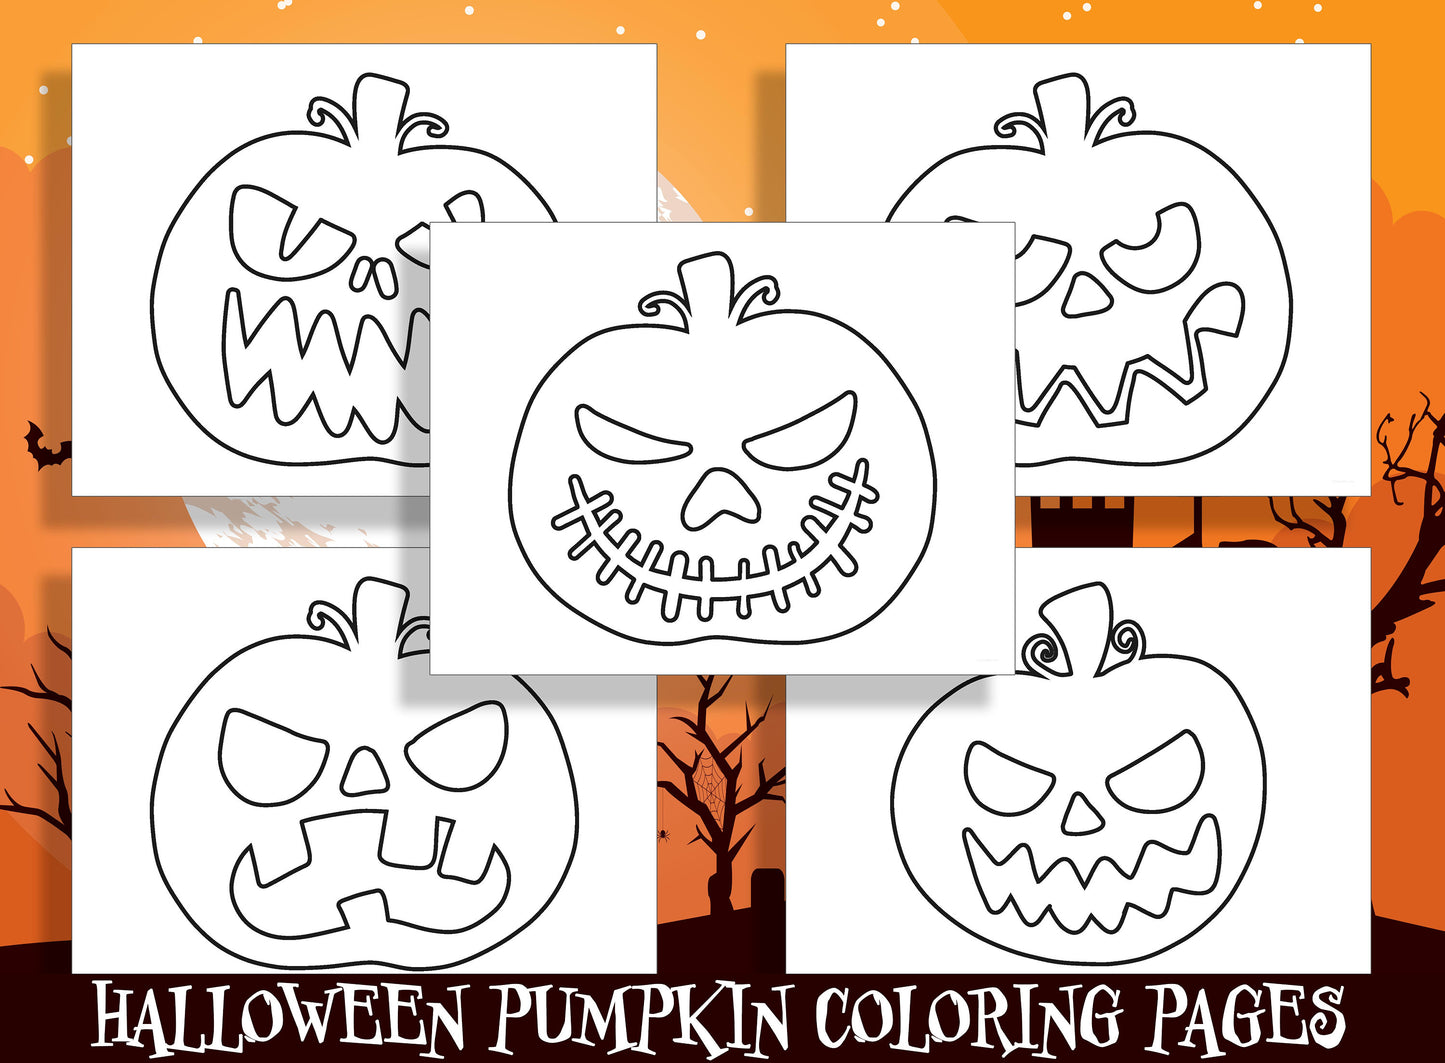 Spooky Fun for Little Ones: 25 Halloween Pumpkin Coloring Pages for Preschool and Kindergarten - PDF File, Instant Download